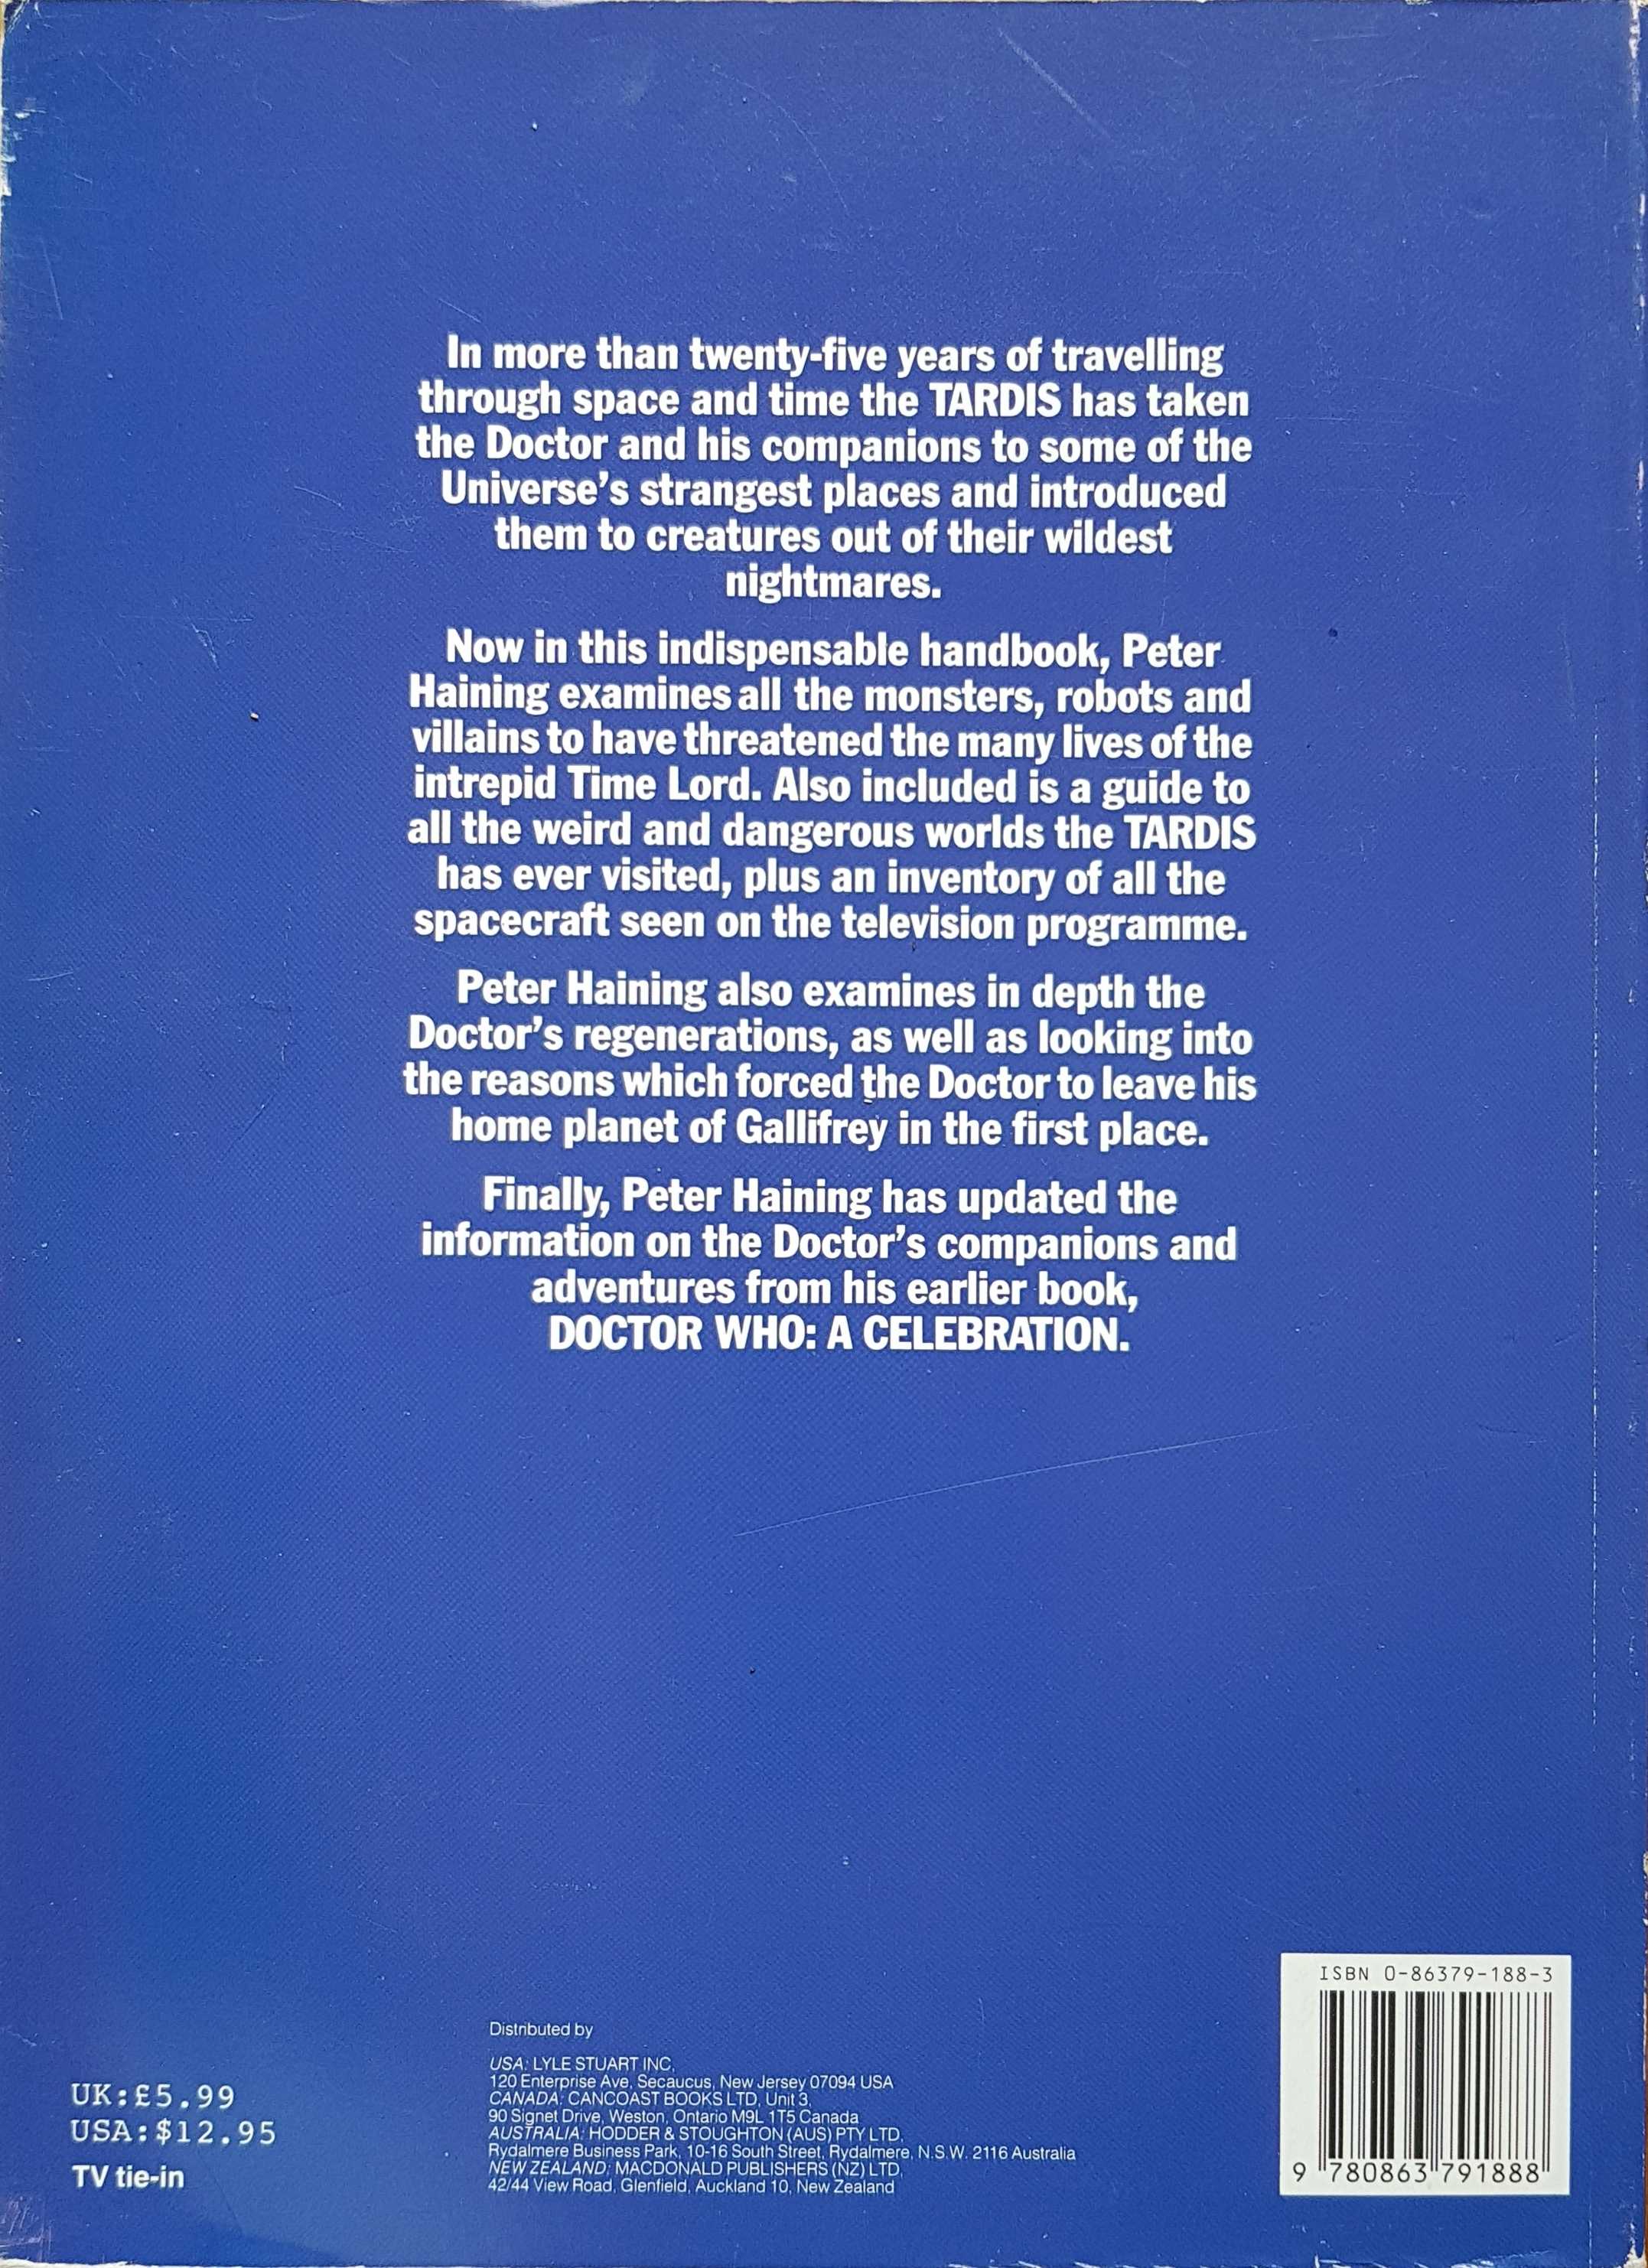 Picture of 0-86379-188-3 Doctor Who - The time travellers' guide by artist Peter Haining from the BBC records and Tapes library